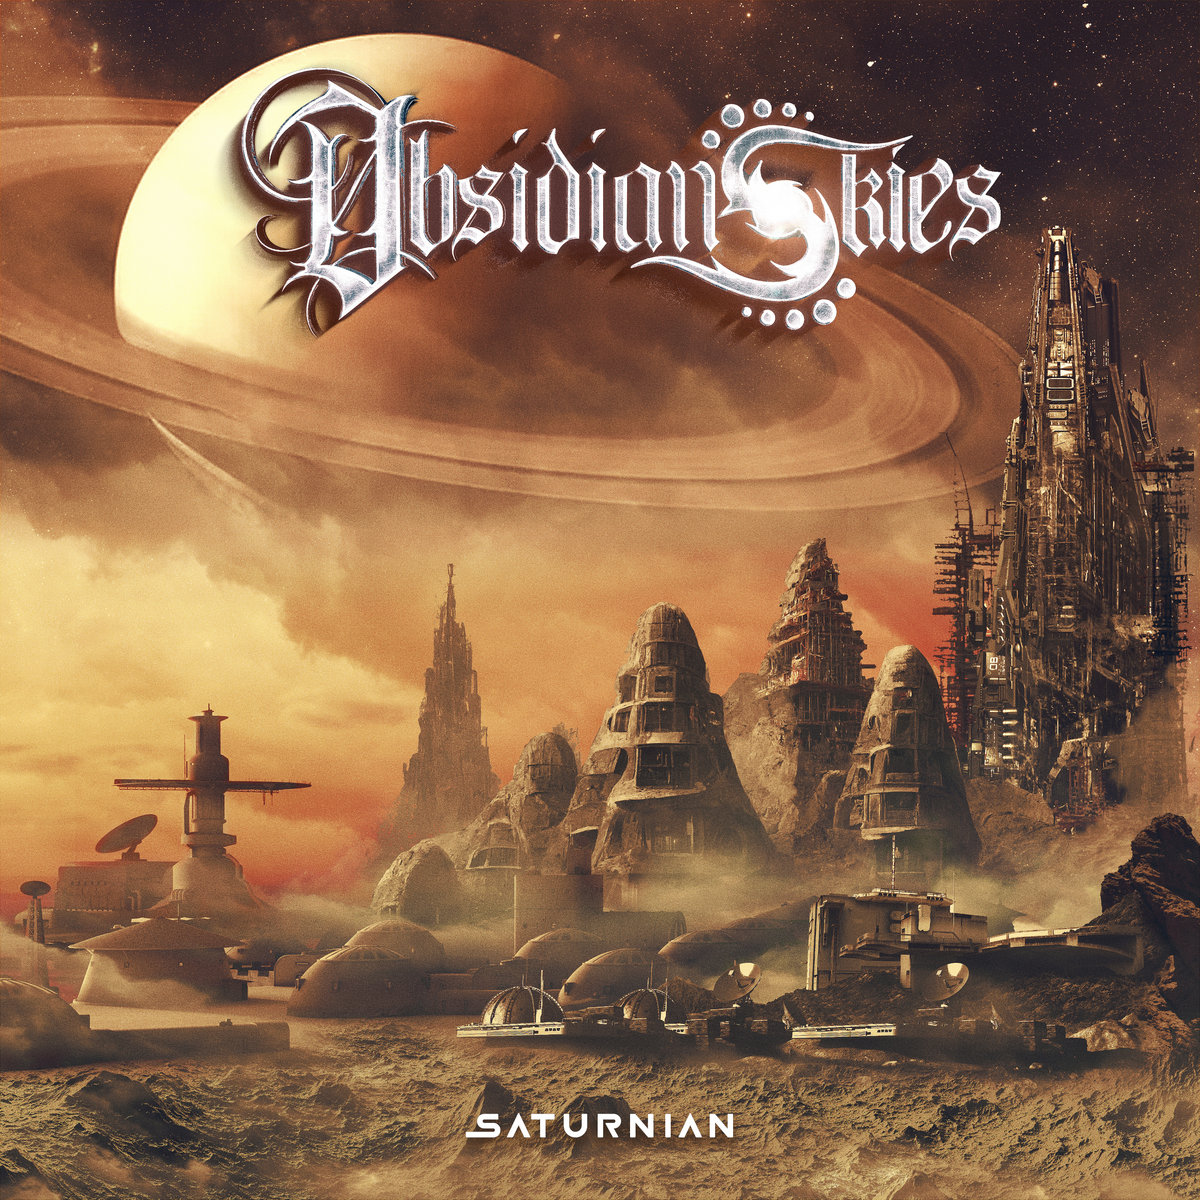 Album art for Obsidian Skies. A futuristic desolate landscape with Saturn in the background,